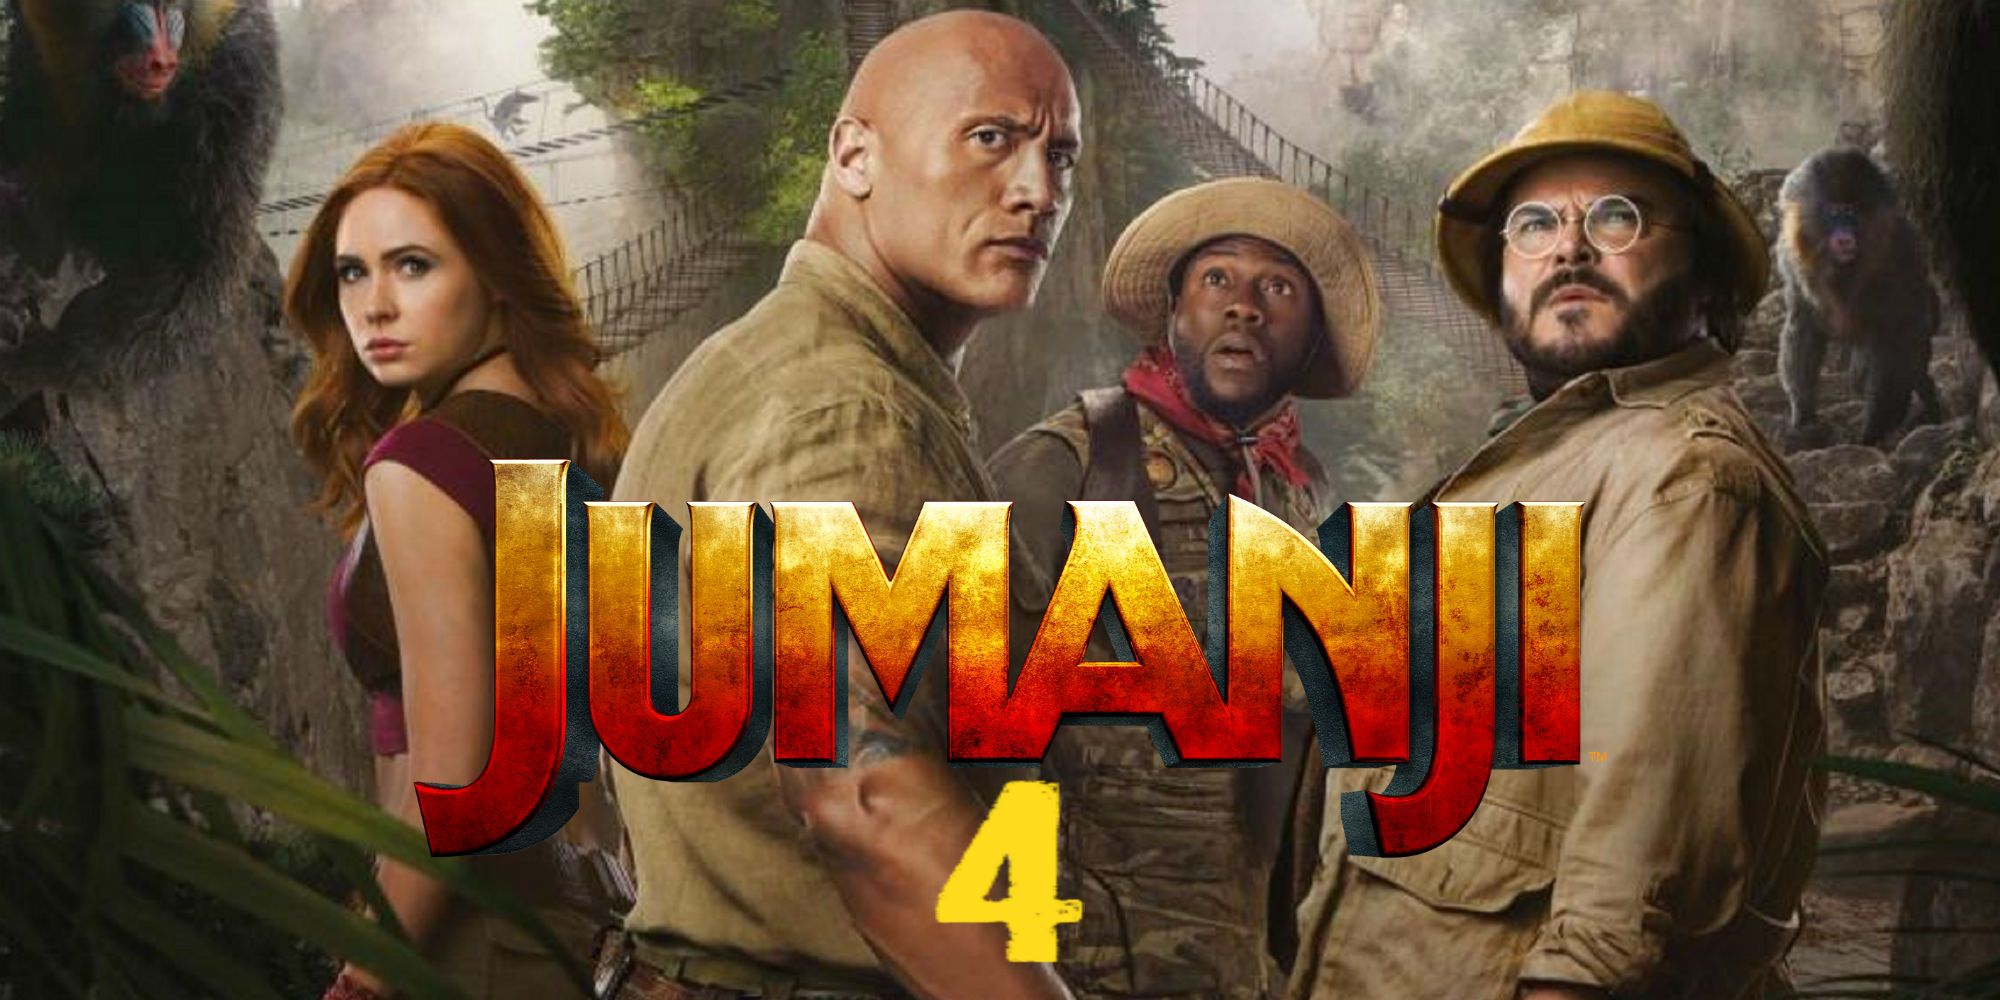 Jumanji 4 title scrawled over an image of the cast